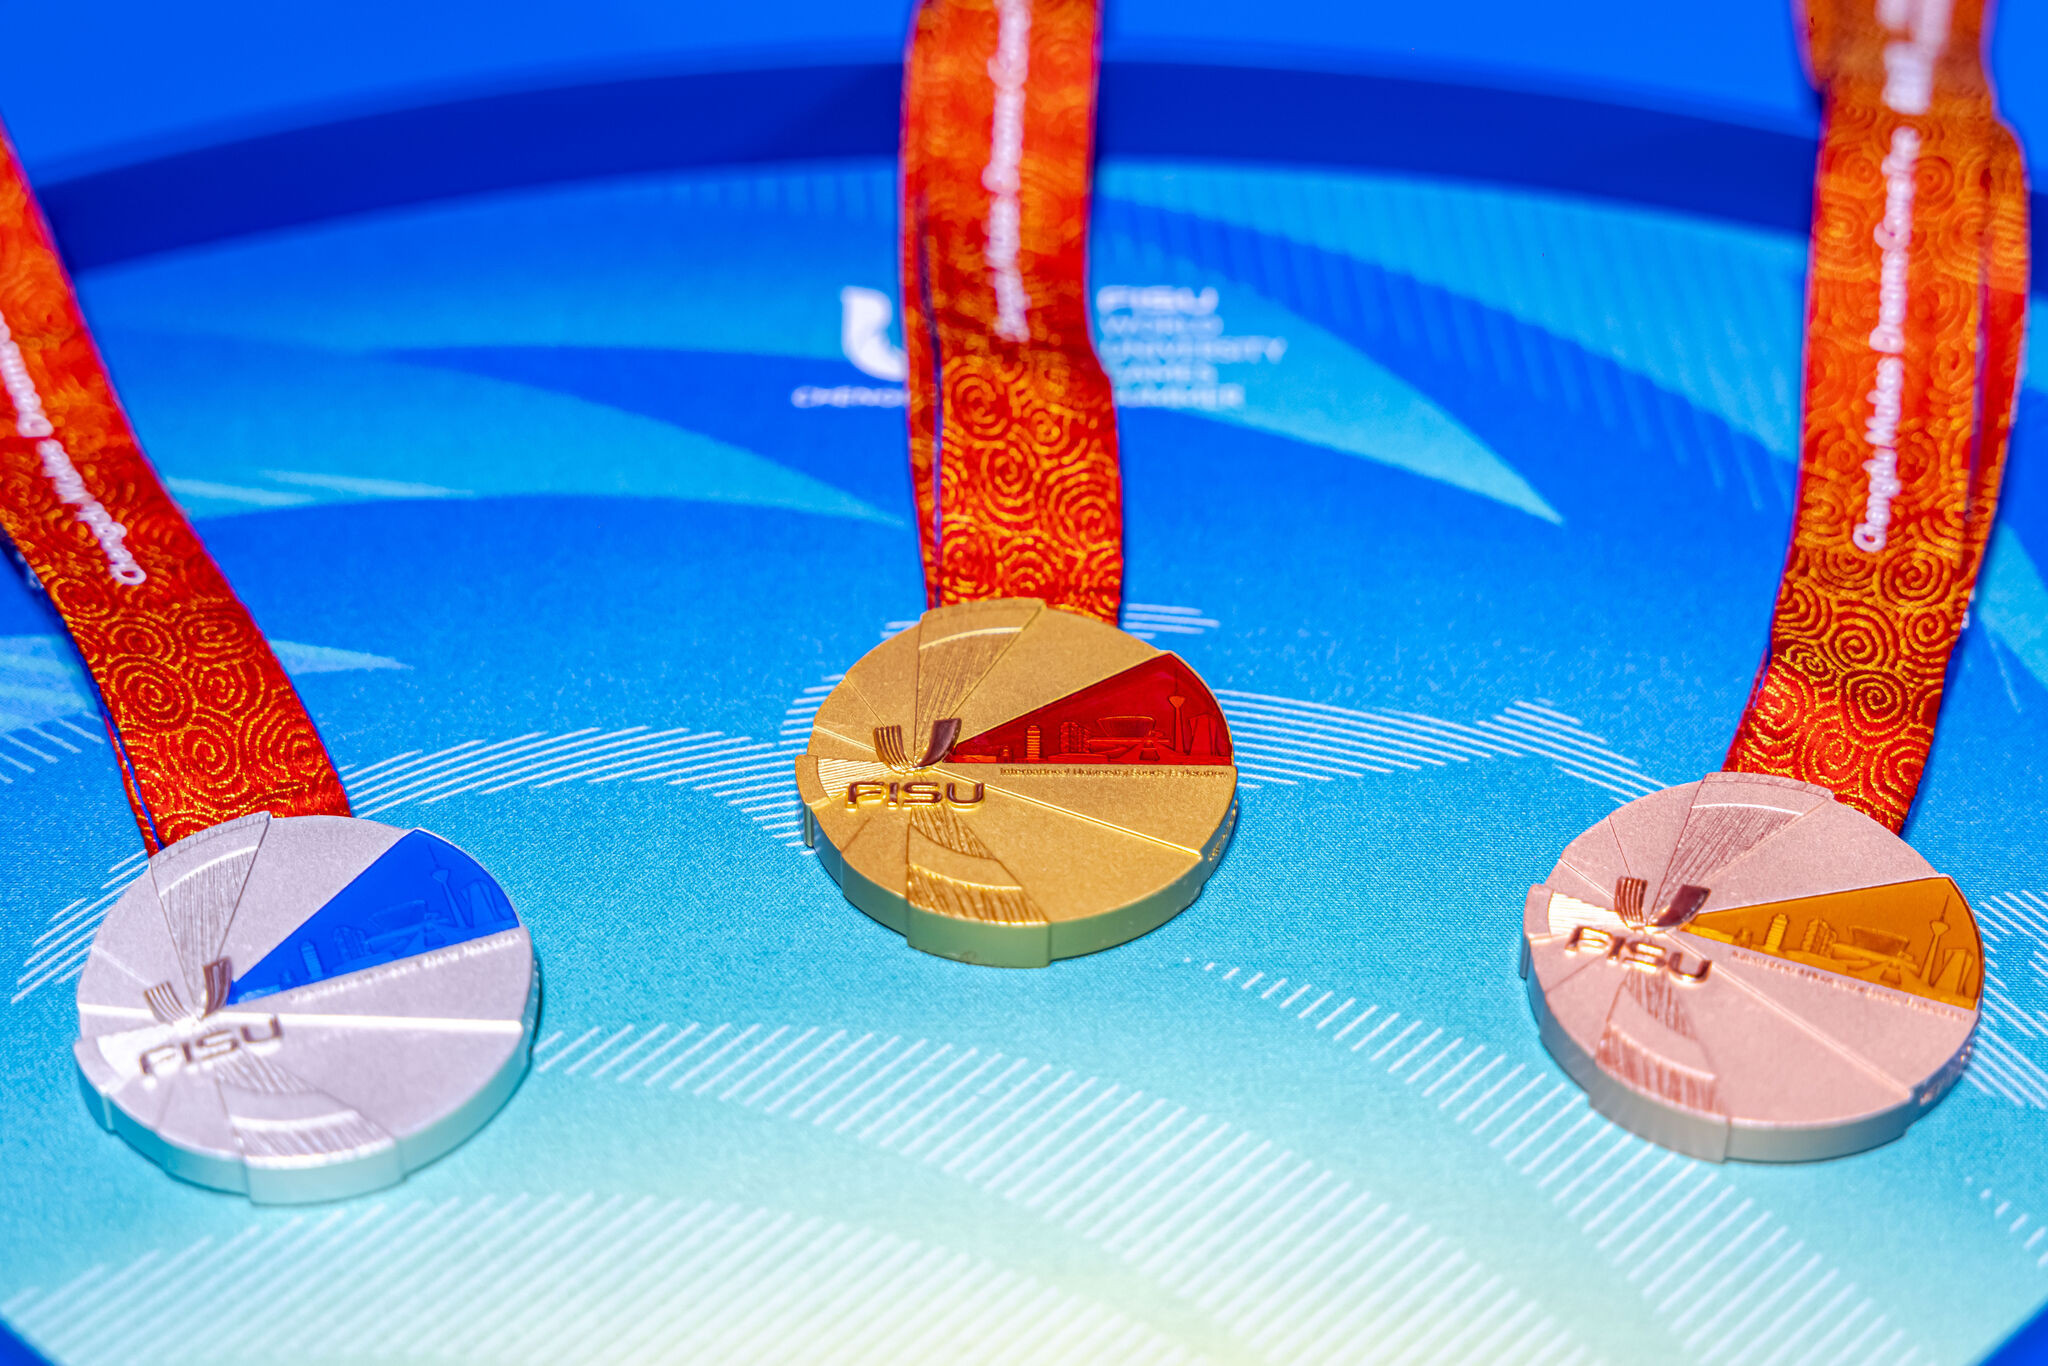 The medals of the Chengdu 2021 FISU World University Games have been named "Rongguang" ©FISU